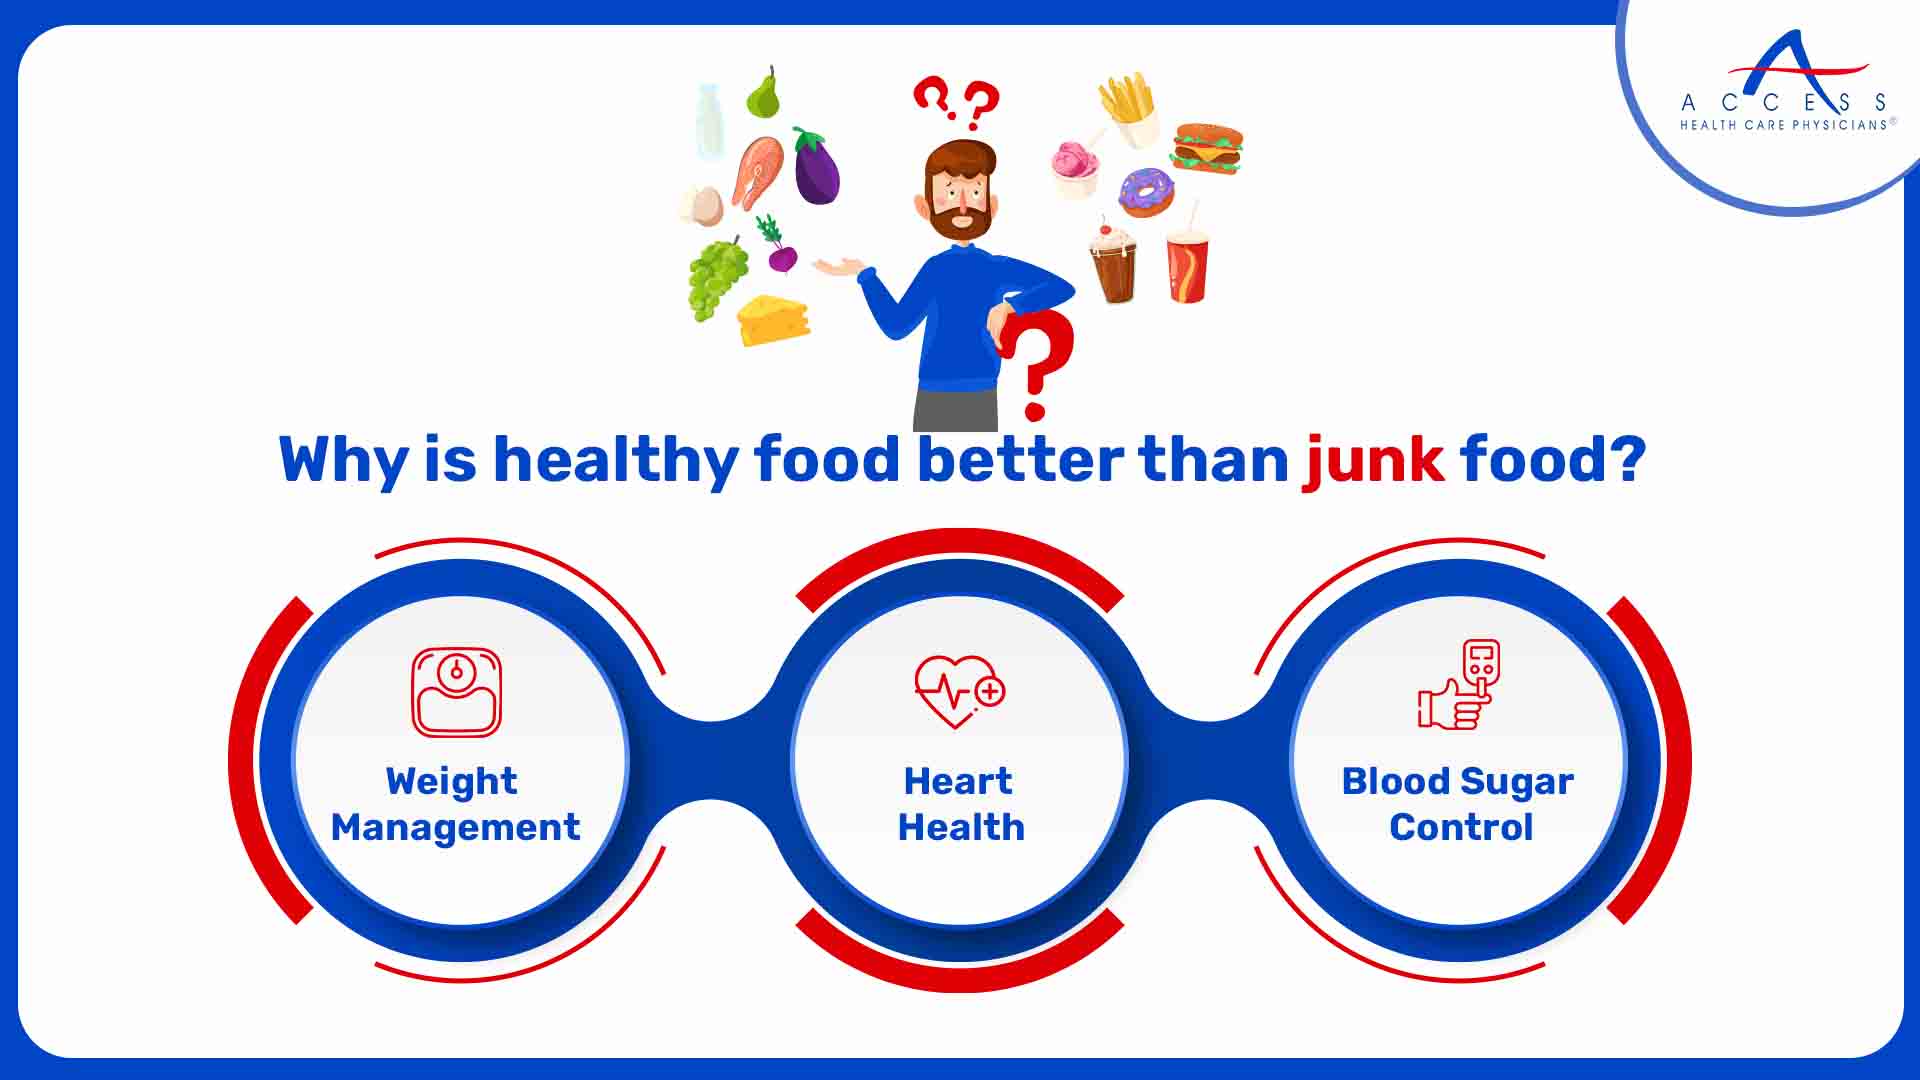 Why is healthy food better than junk food?